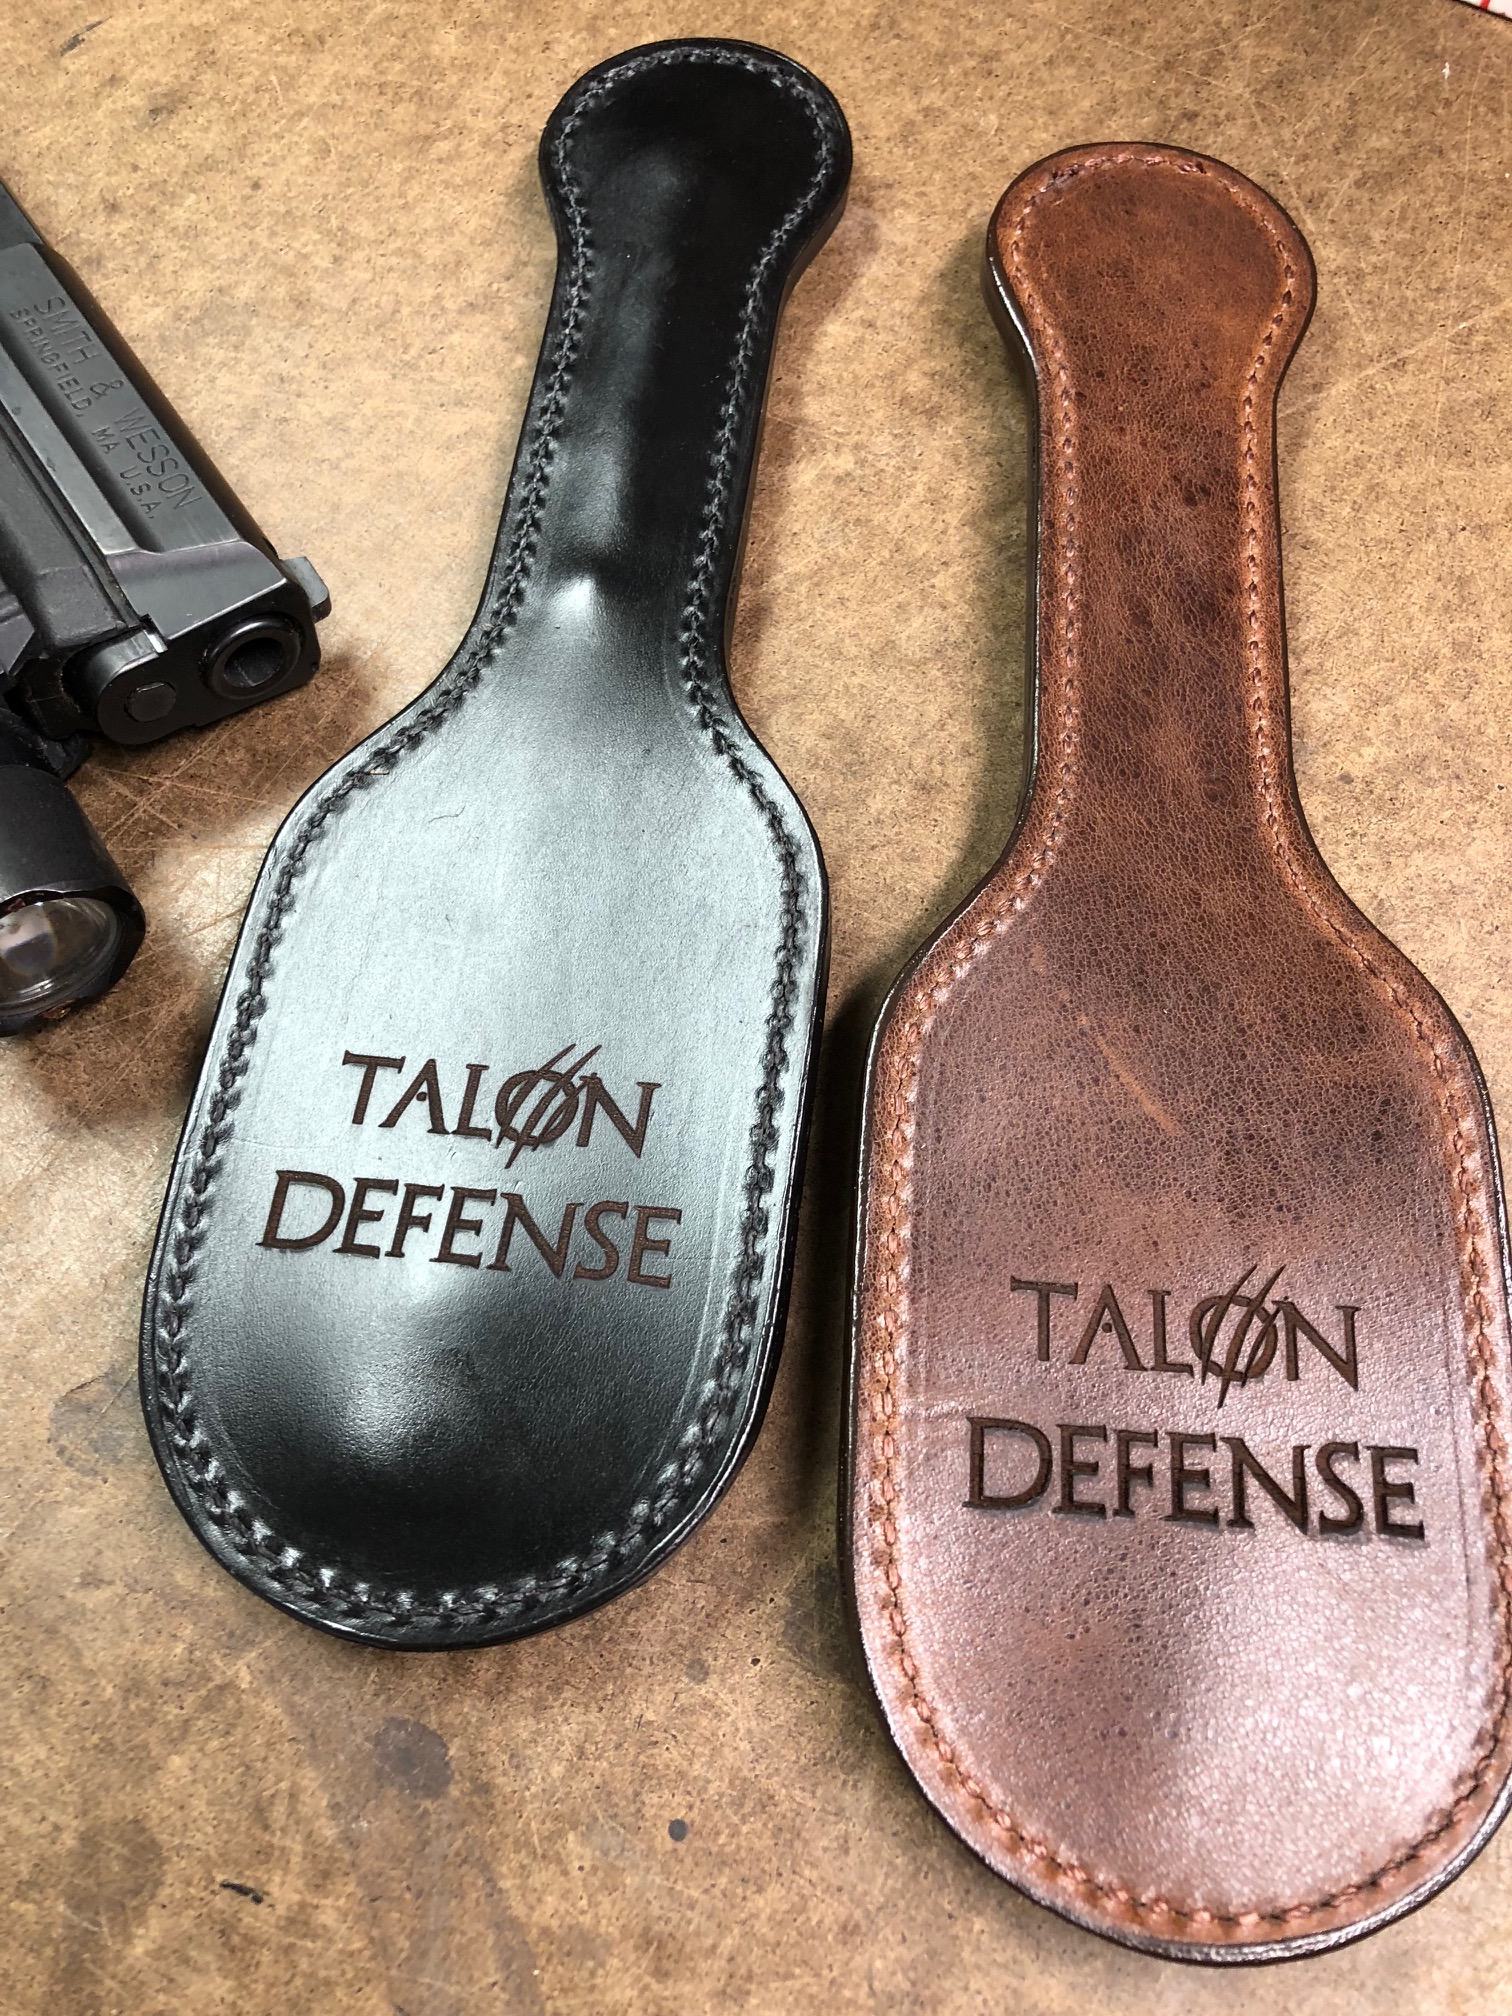 Making Change: A Less-Lethal Coin Purse from Mean Gene Leather - ITS  Tactical